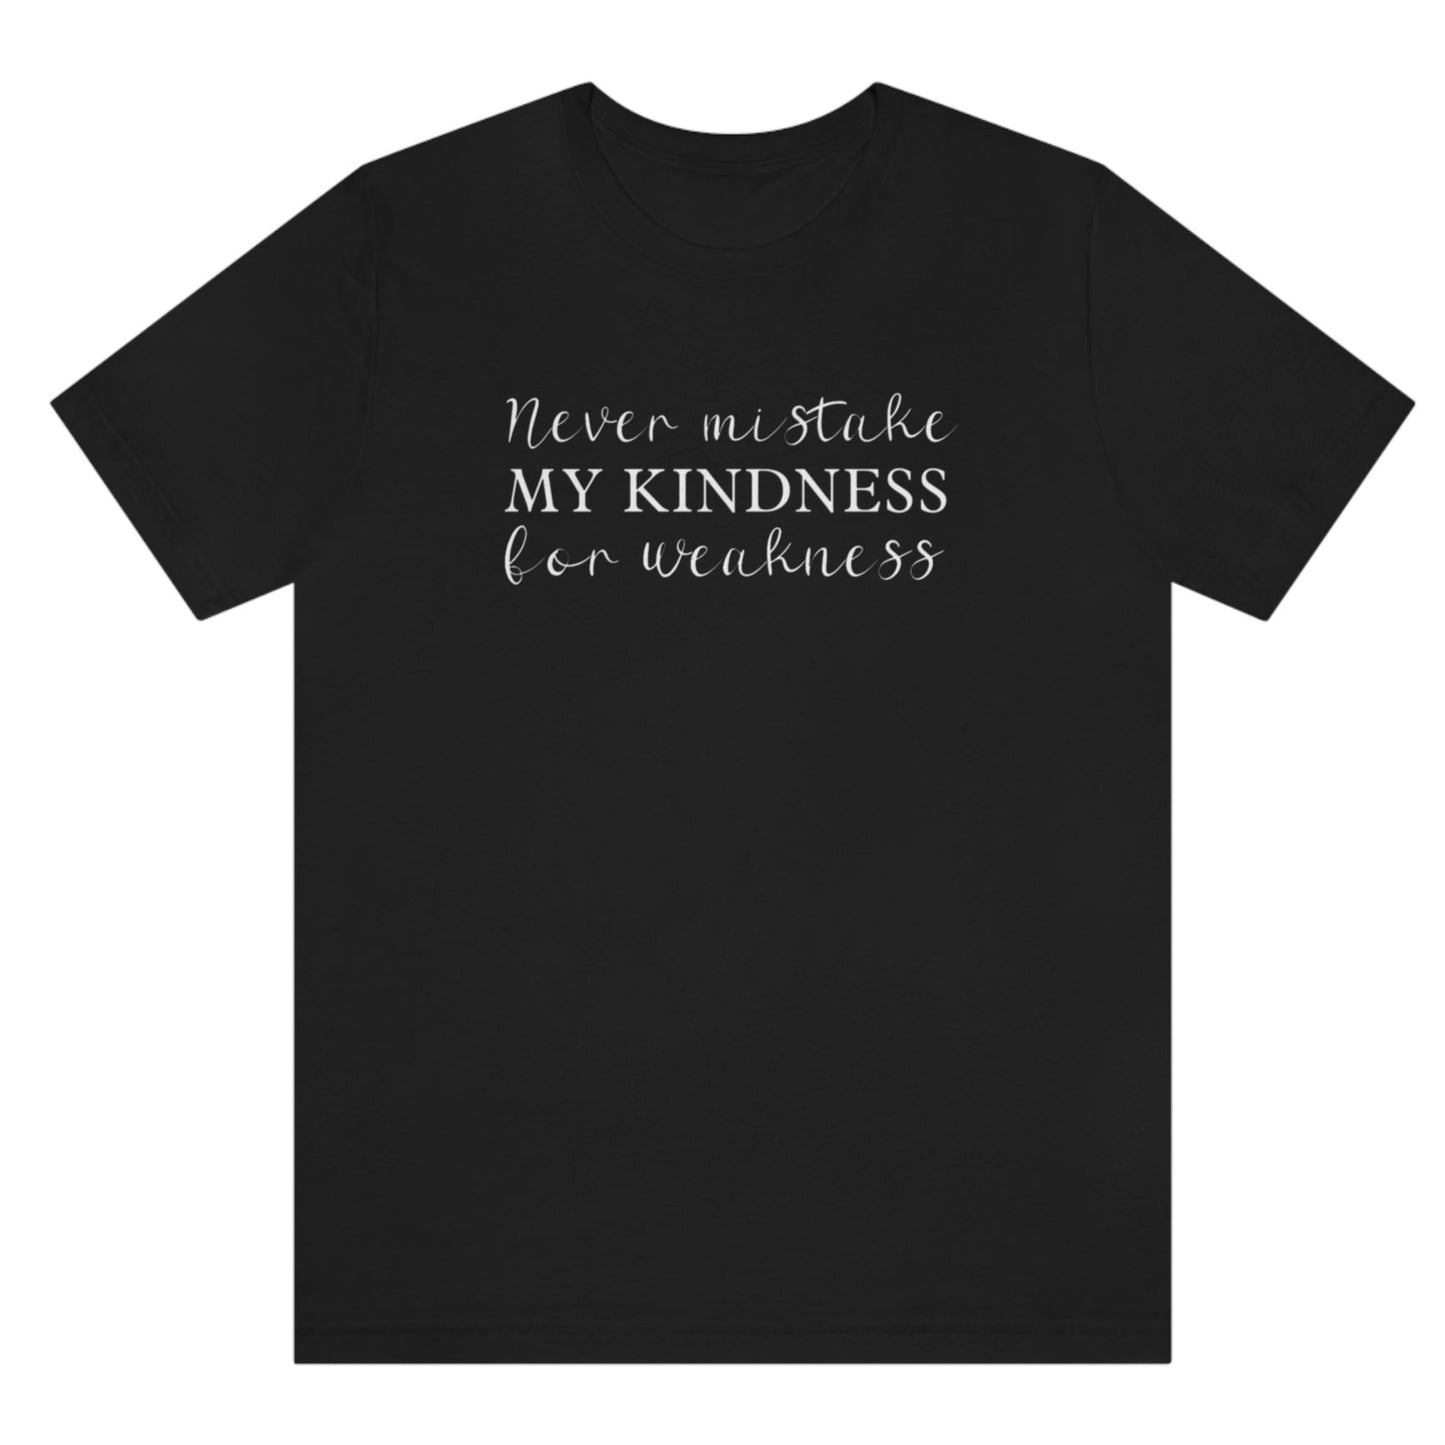 never-mistake-my-kindness-for-weakness-black-t-shirt